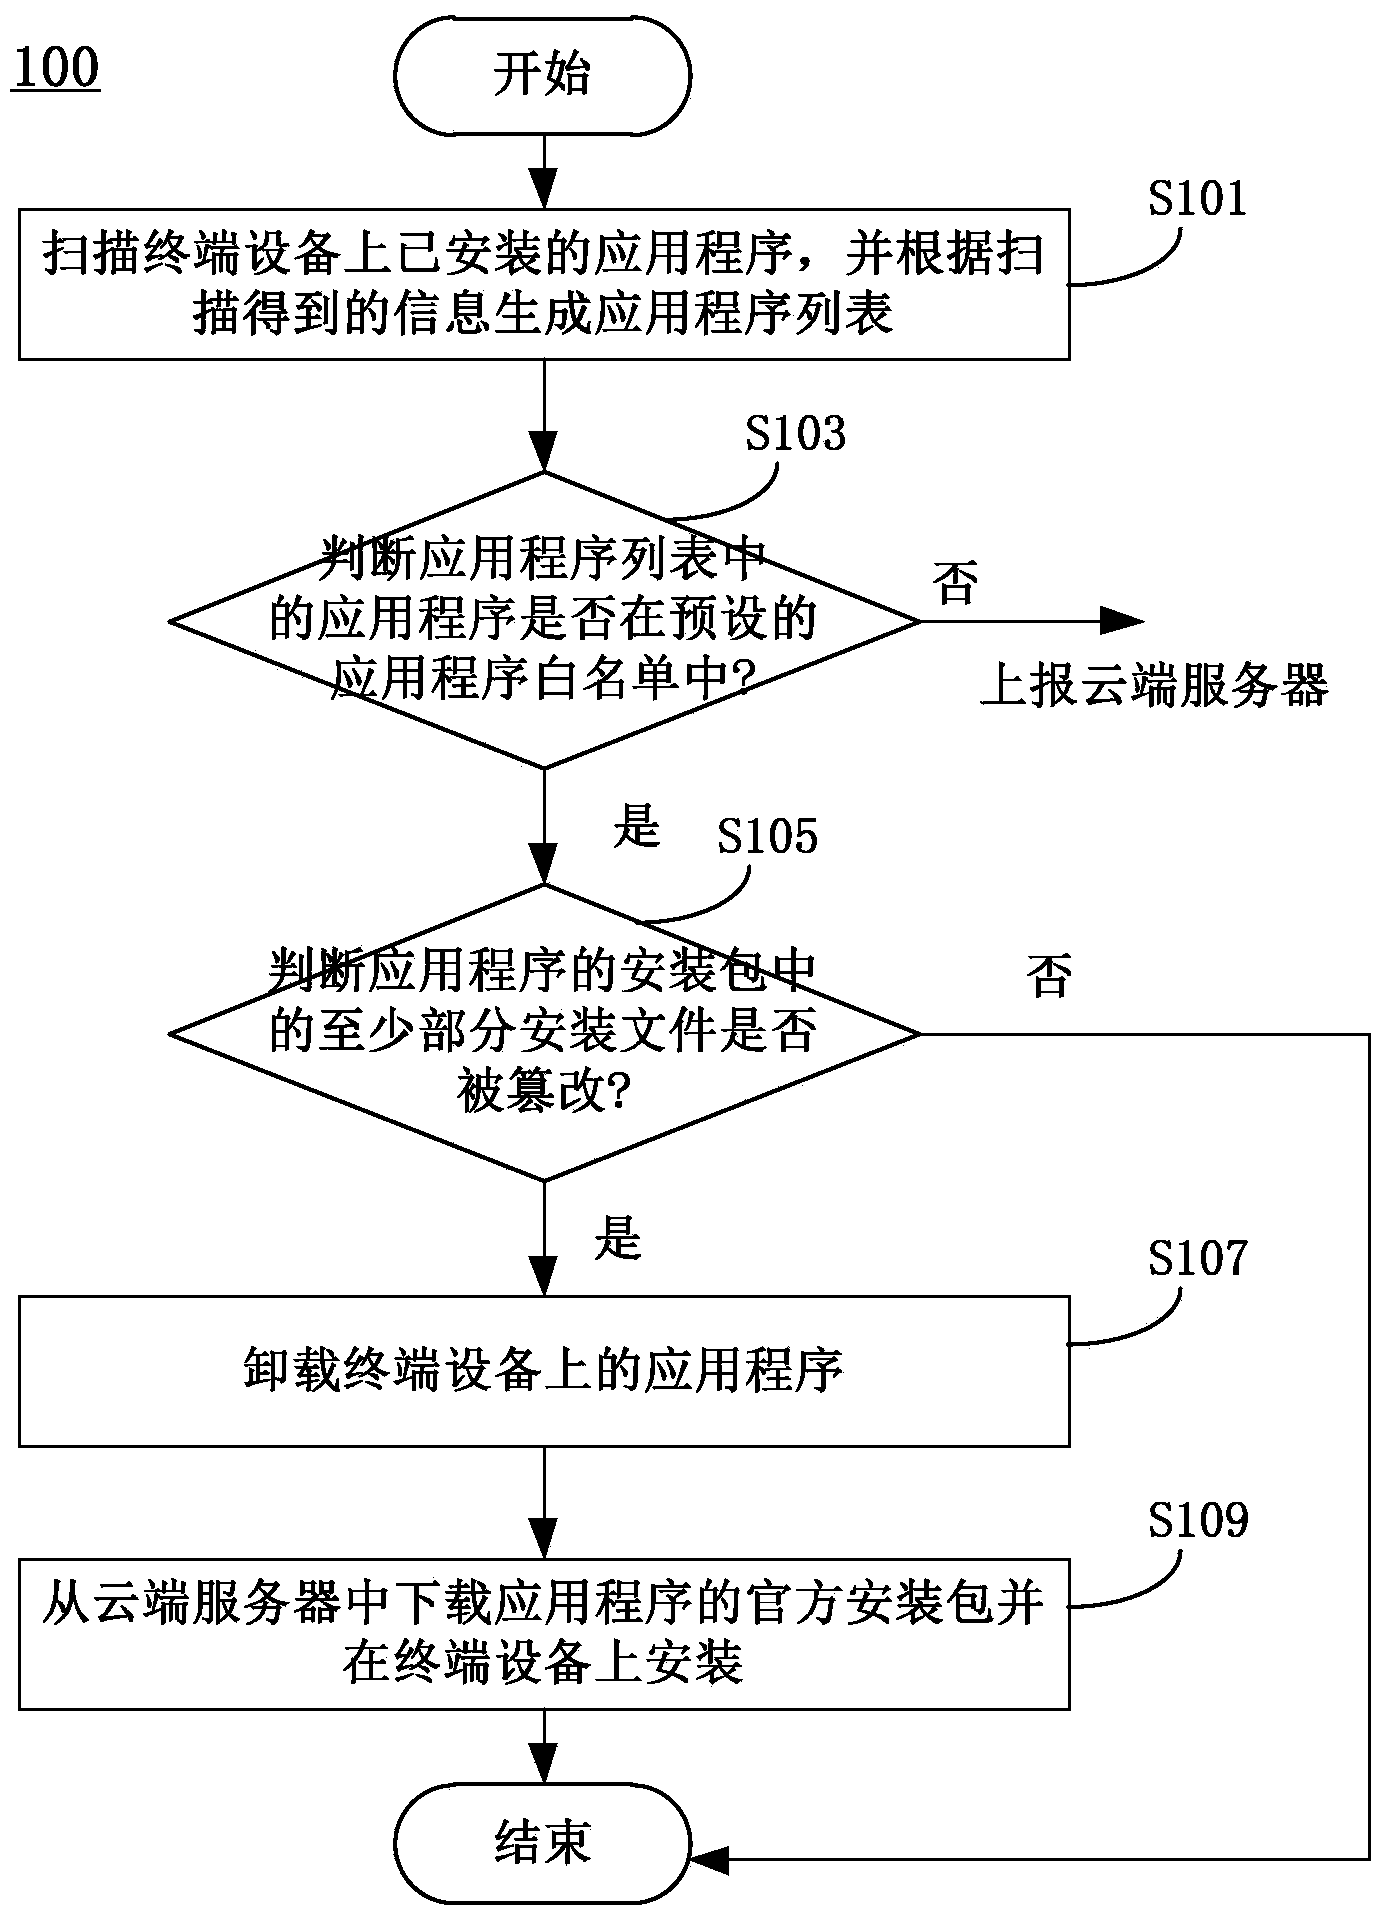 Method and device for repairing cheap-copy application programs